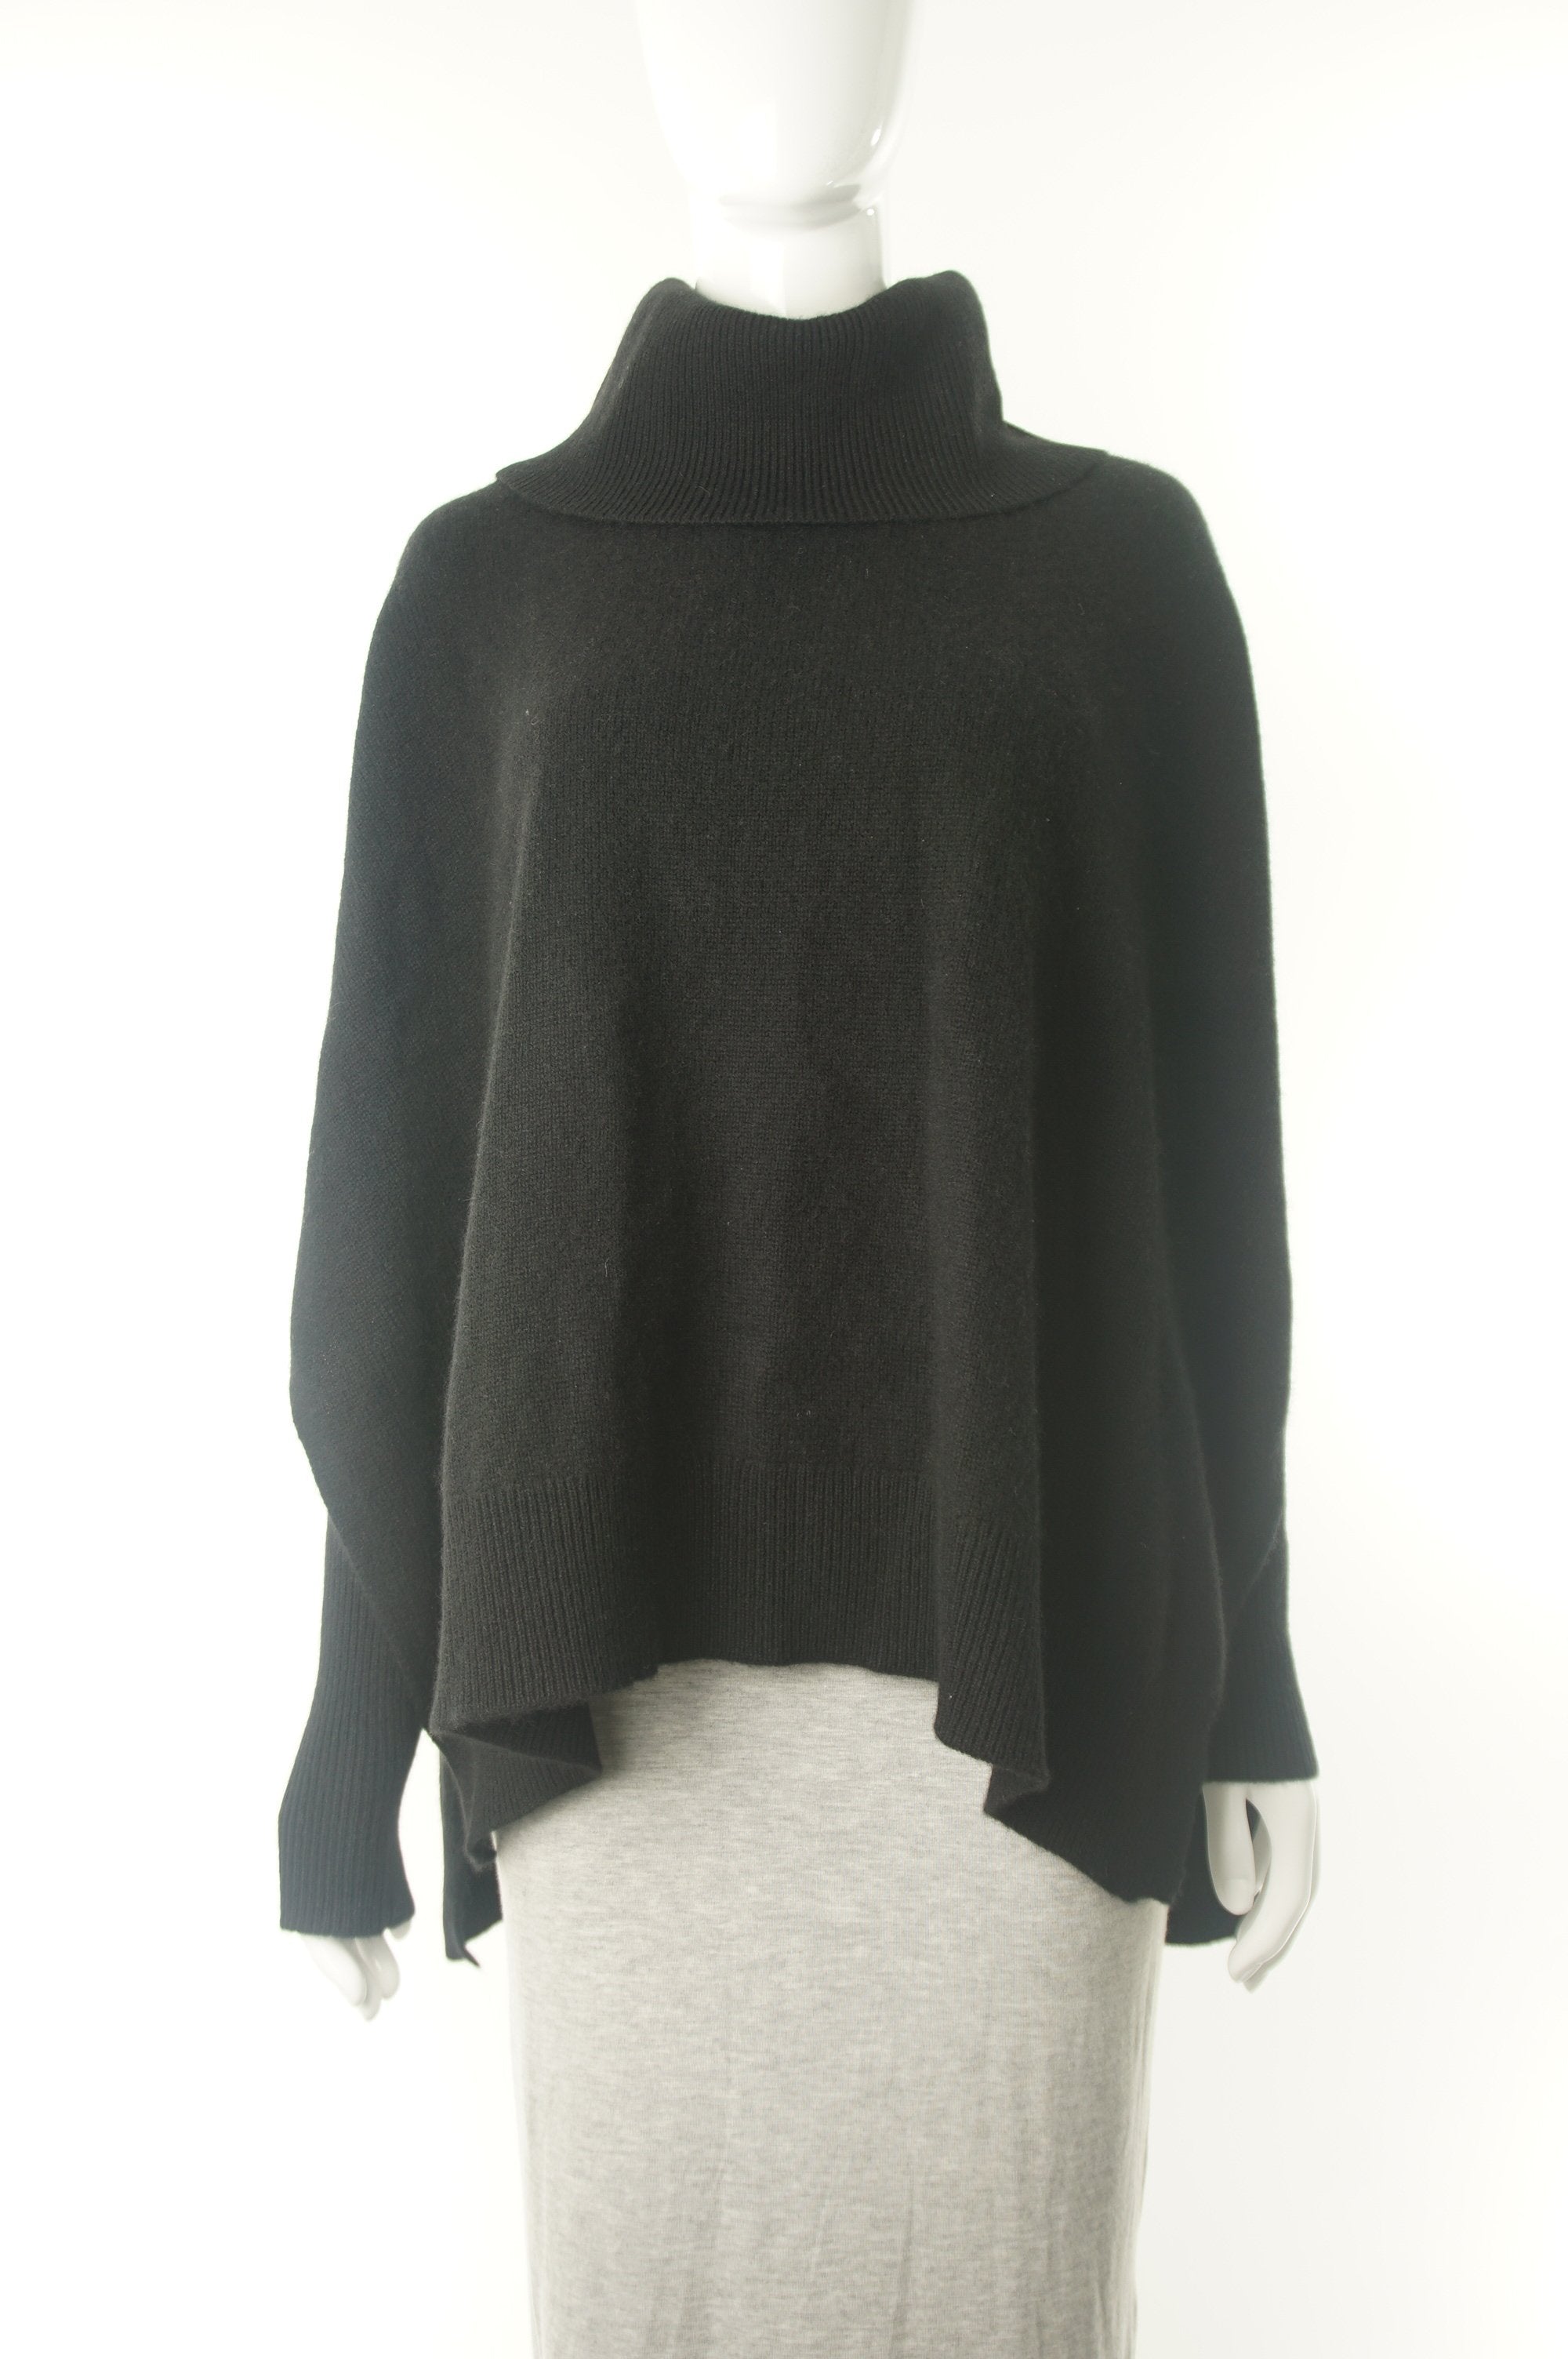 Lord & Taylor Cashmere Cape Poncho, Super soft pullover for a warm and elegant look., Black, 100% Cashmere, women's Tops, women's Black Tops, Lord & Taylor women's Tops, women's cashmere poncho, women's pullover sweater, lord&taylor cashmere sweater